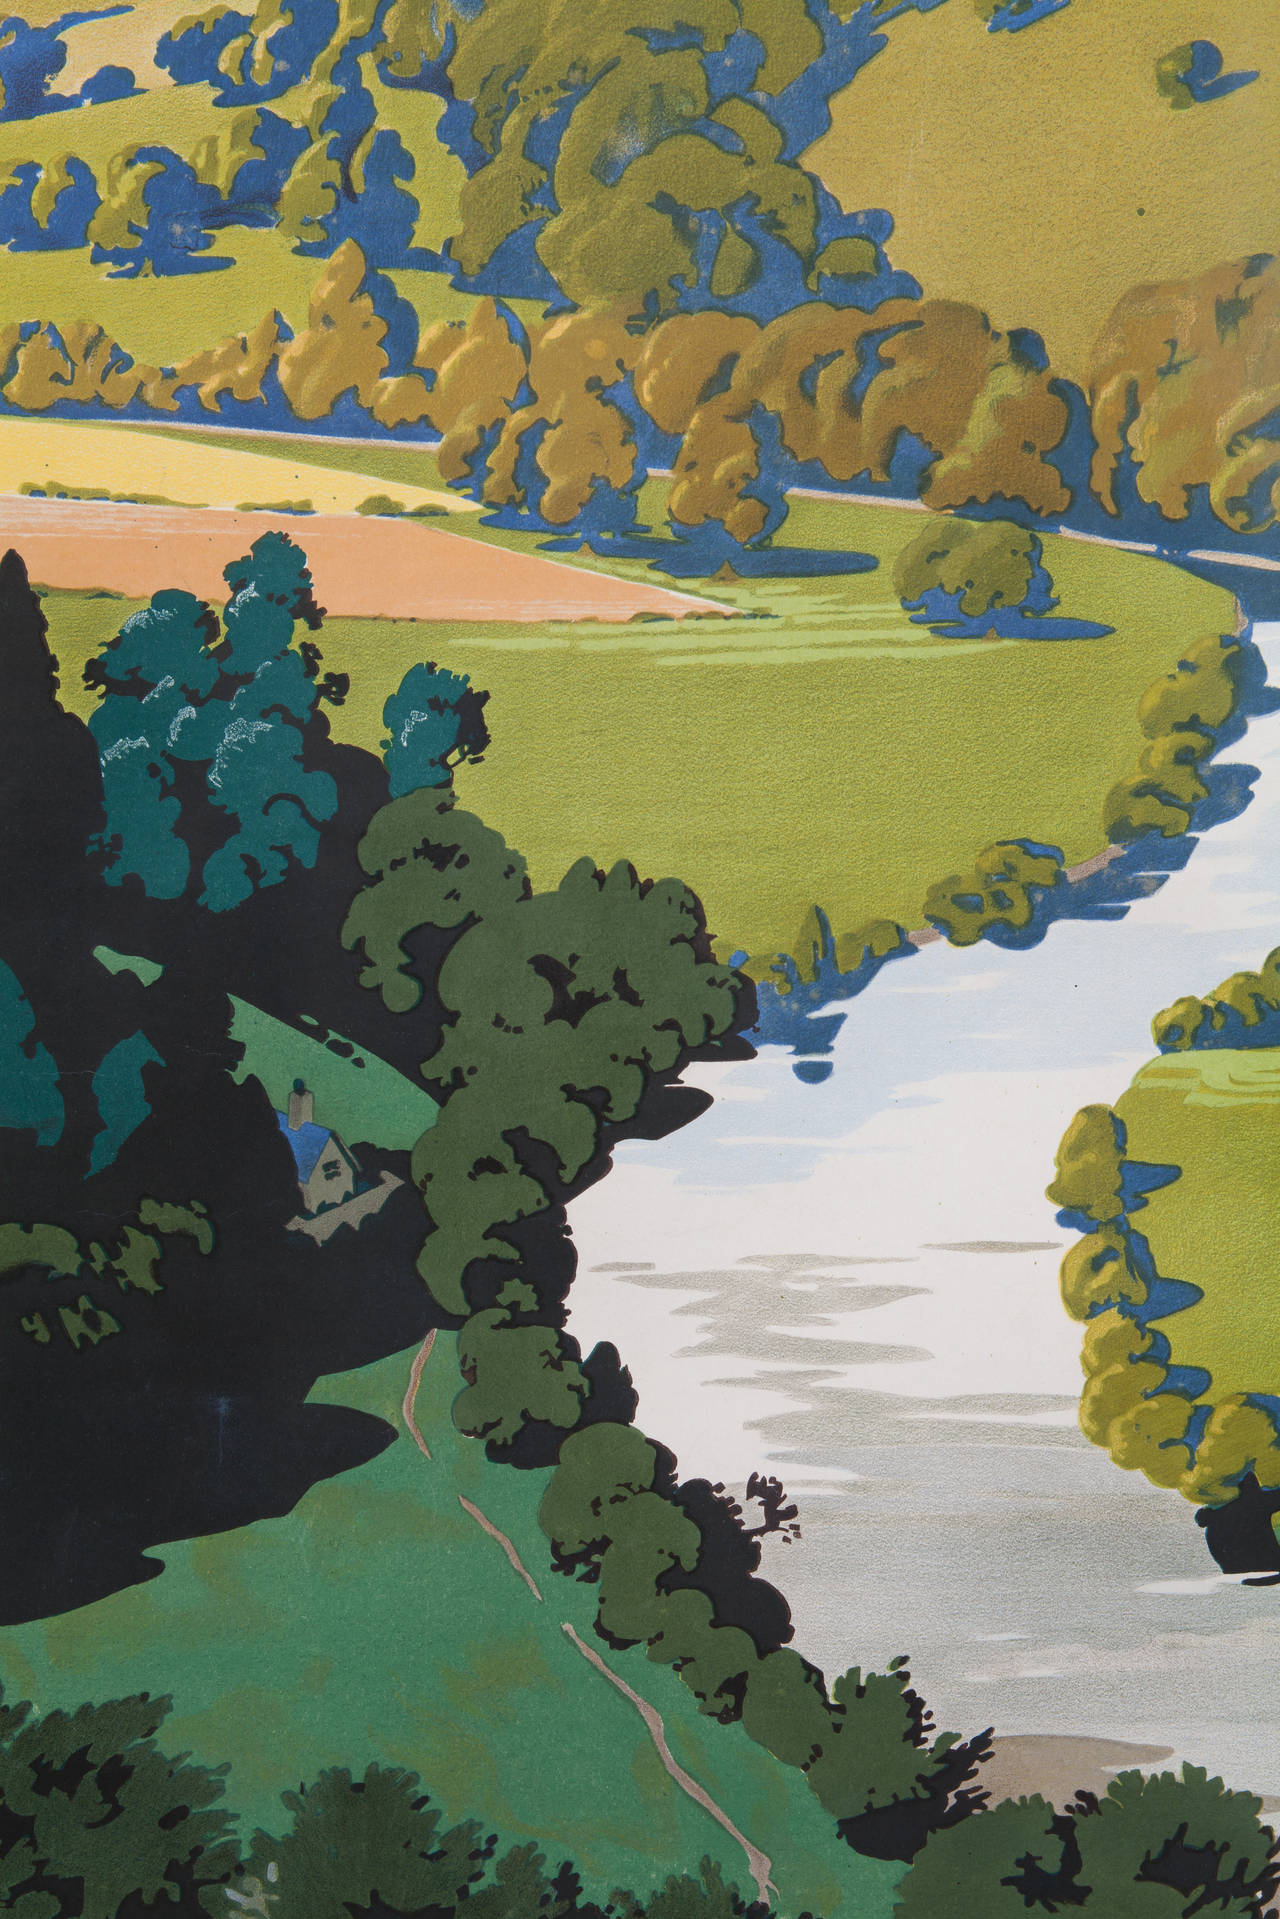 Mid-Century Modern Rare Post-War Railway Promotional Poster for Travel to the Wye Valley